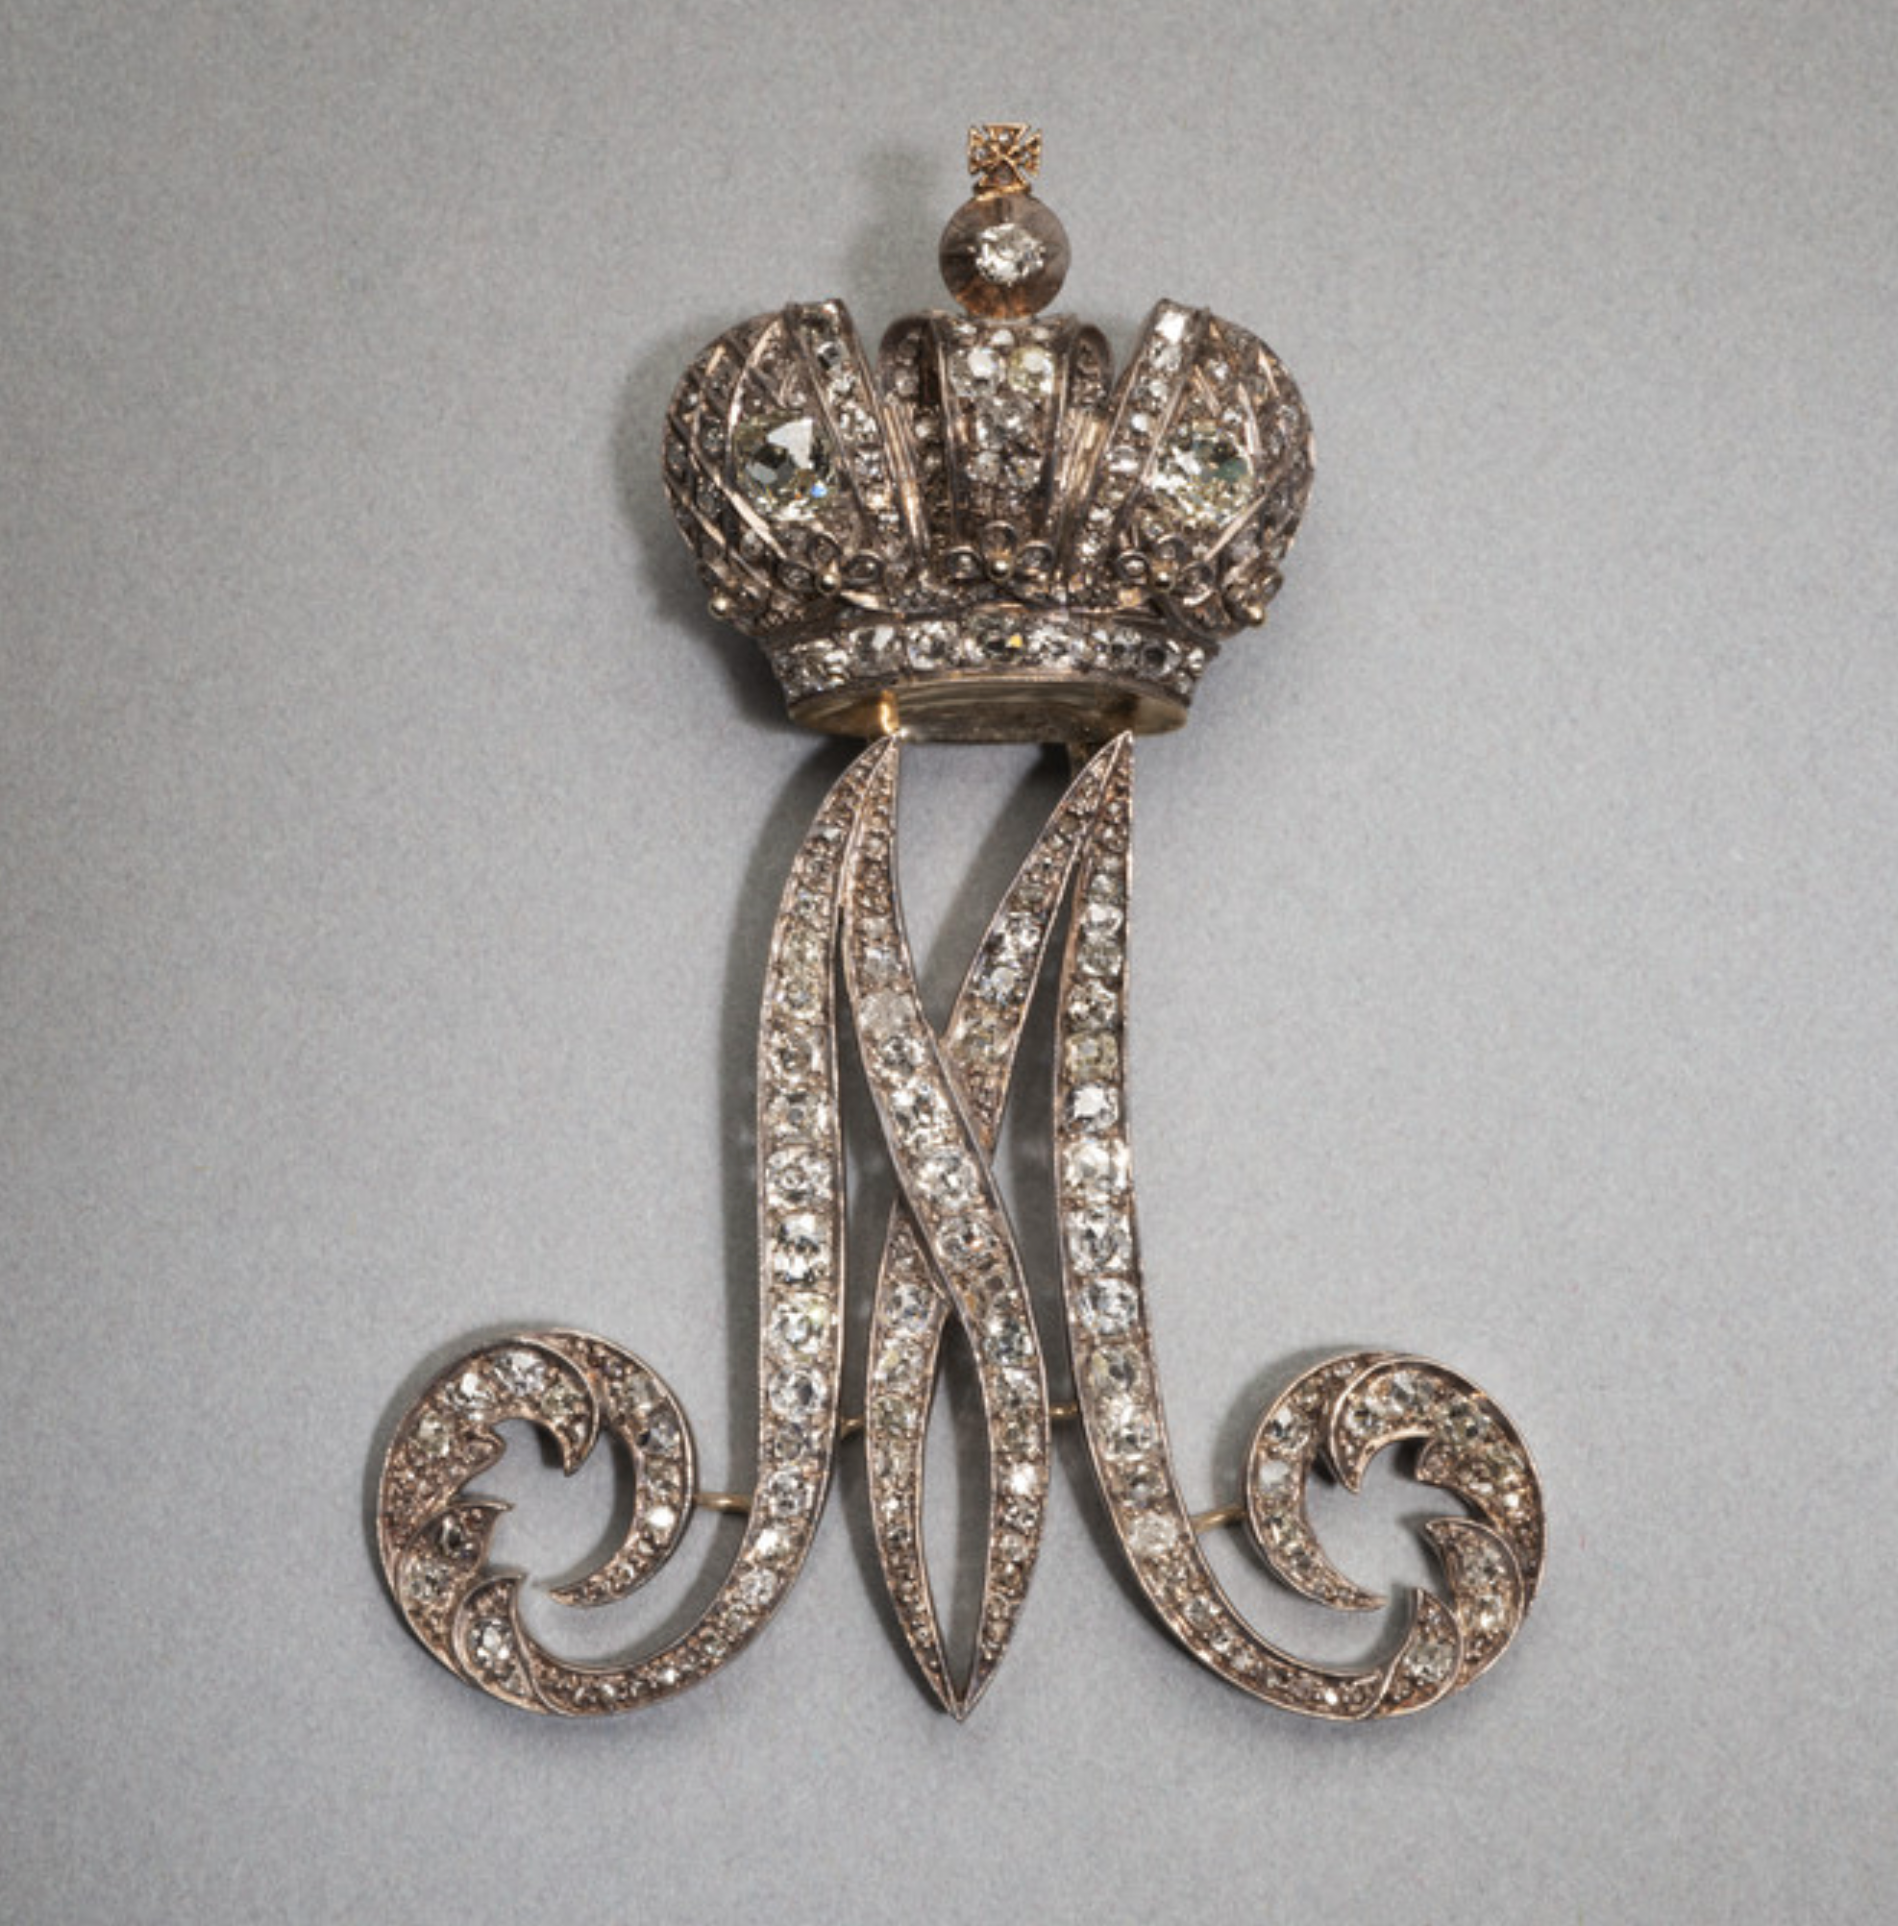 This is the cypher for Empress Maria Fedorovna (Empress of Russia from 1881-1894). These were known as “Maids of Honor pins” and were wore on the left shoulder. This tradition began in the early 18th century as part of Peter the Great’s efforts to westernize the court. Hillwood Museum.  